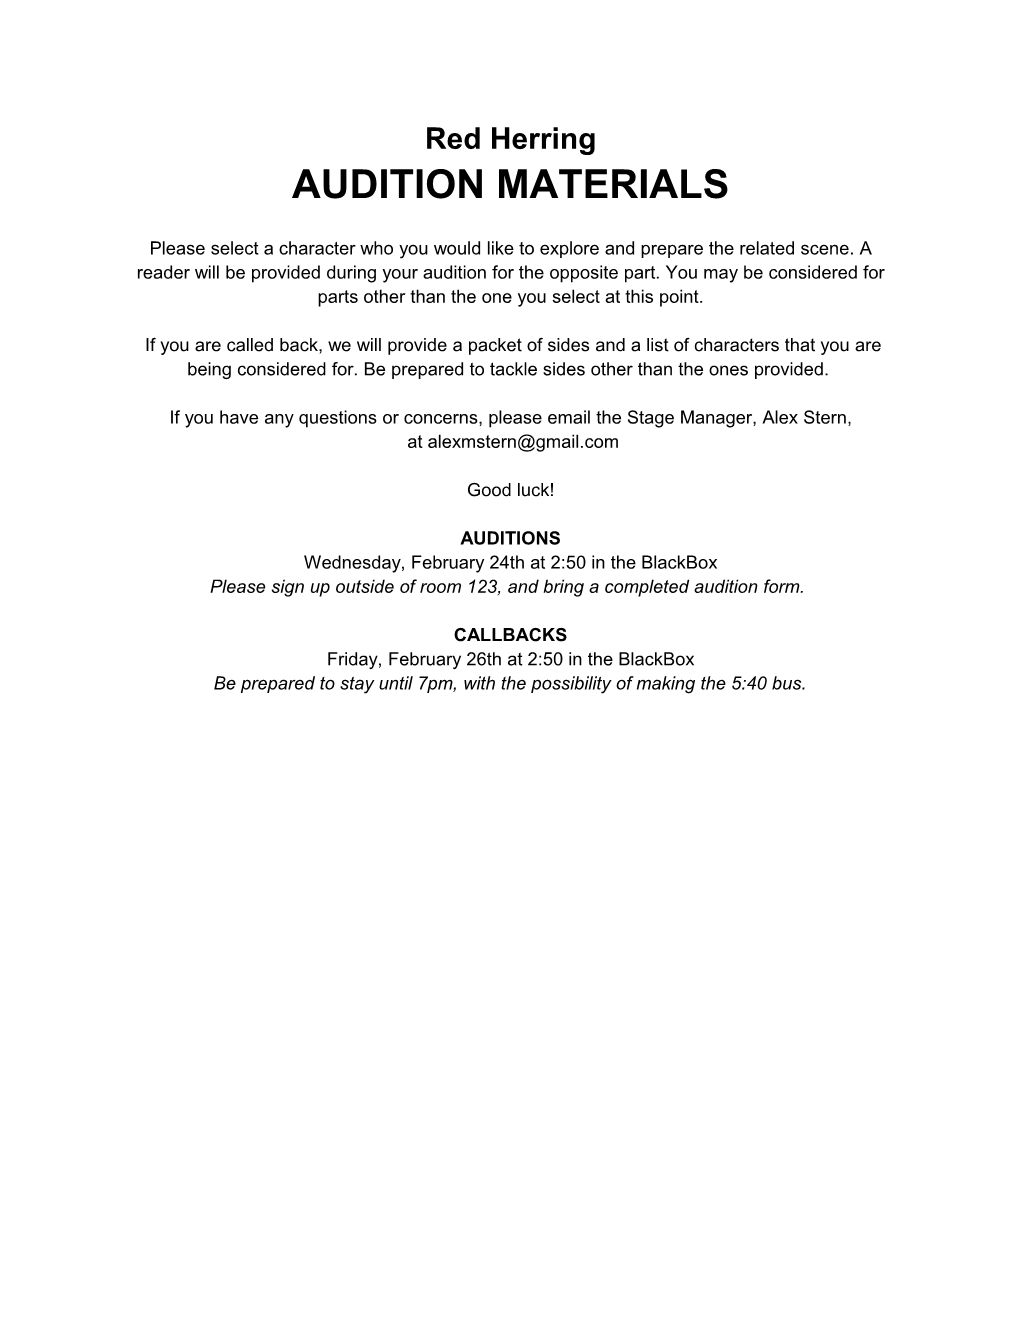 Audition Materials